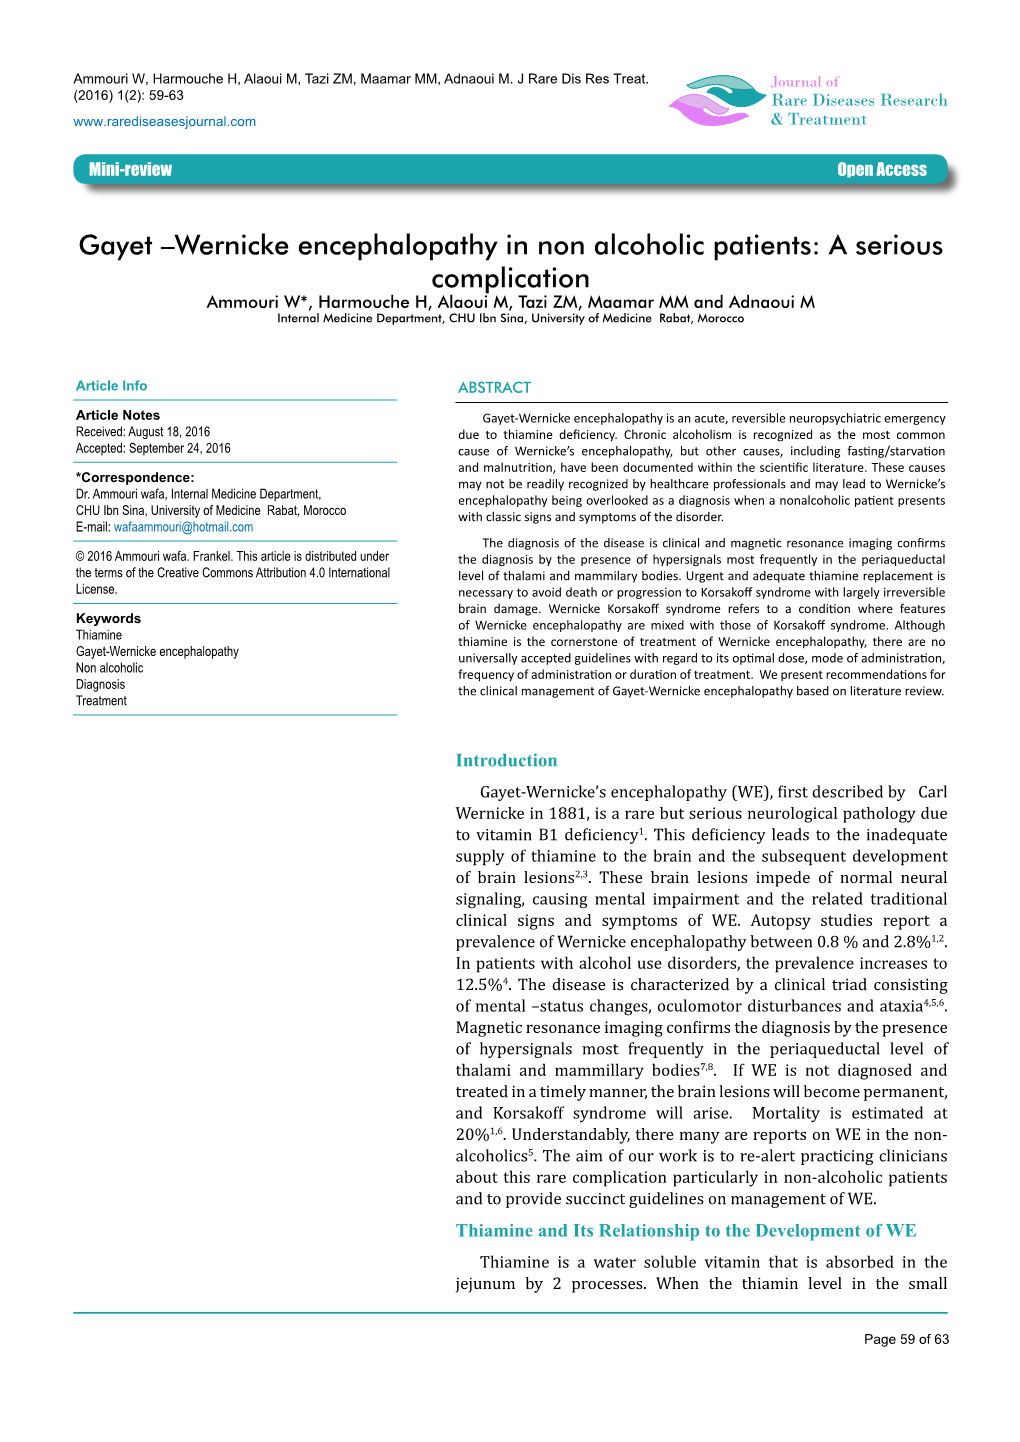 Gayet –Wernicke Encephalopathy in Non Alcoholic Patients: a Serious Complication